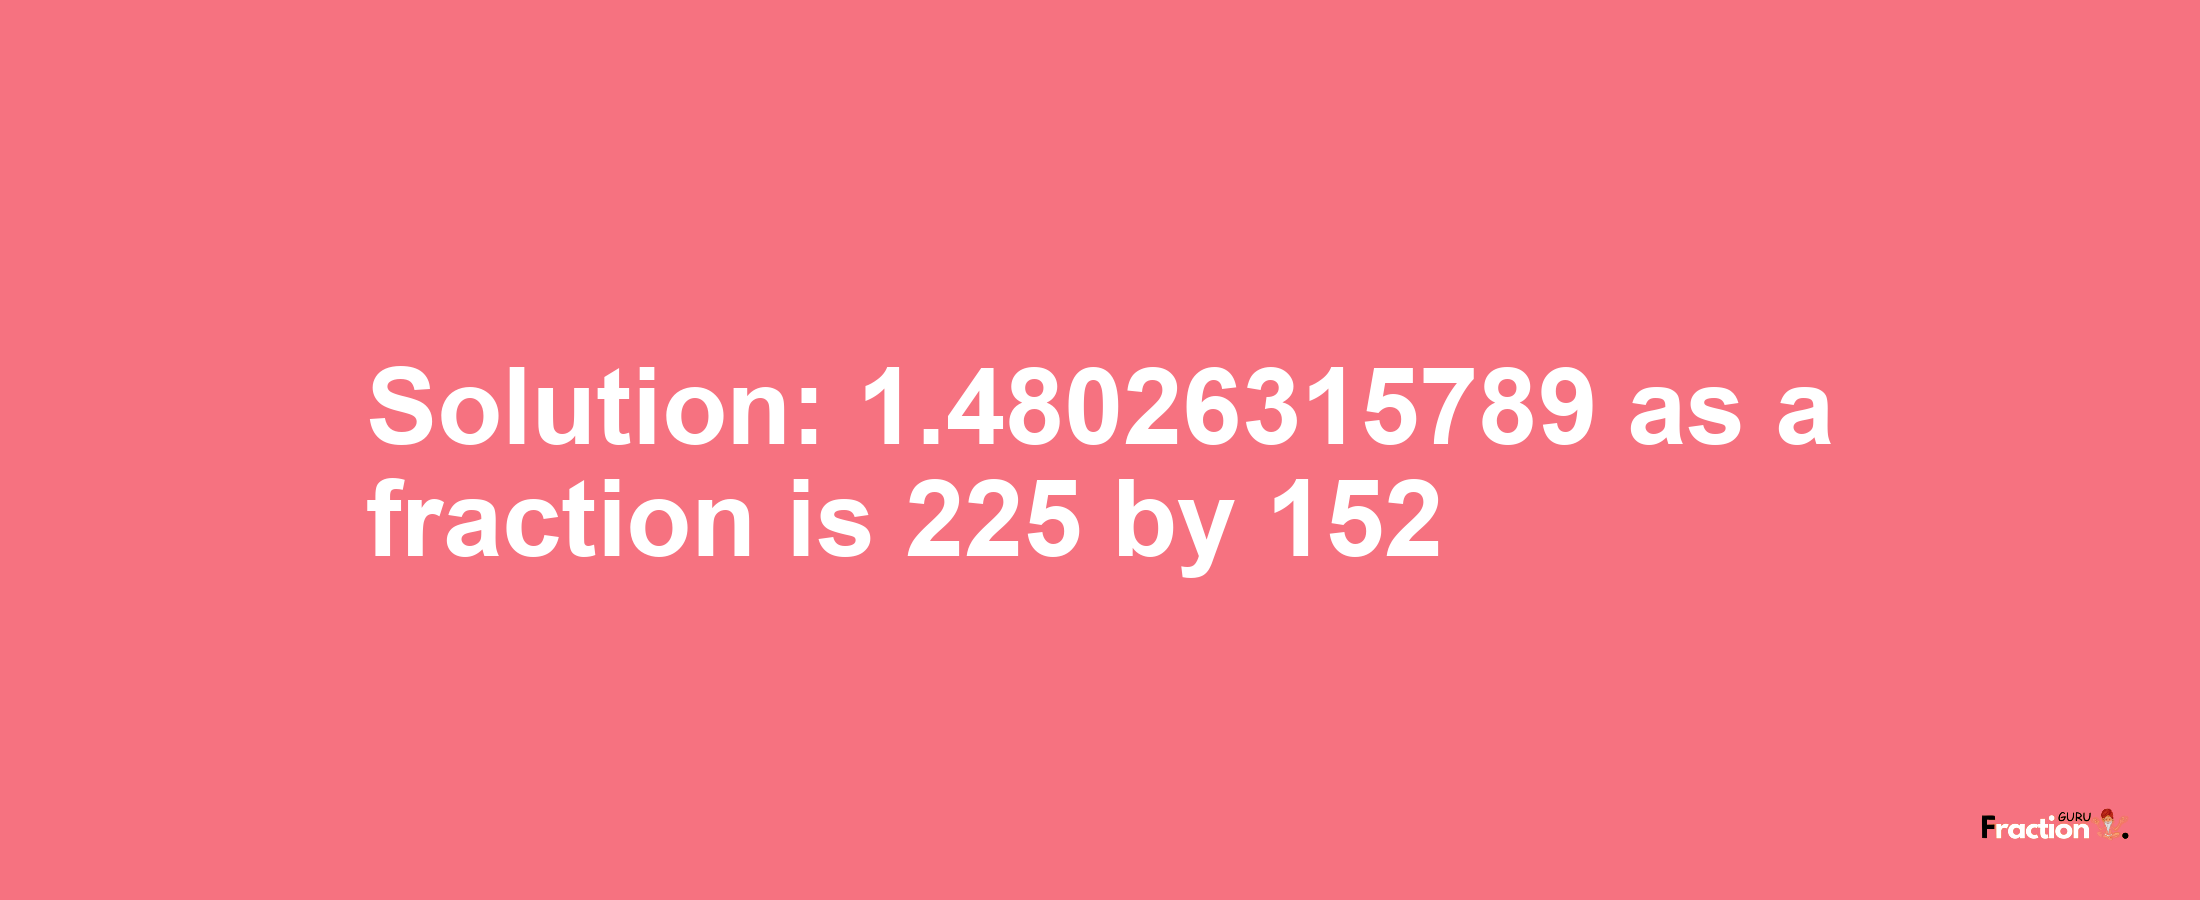 Solution:1.48026315789 as a fraction is 225/152